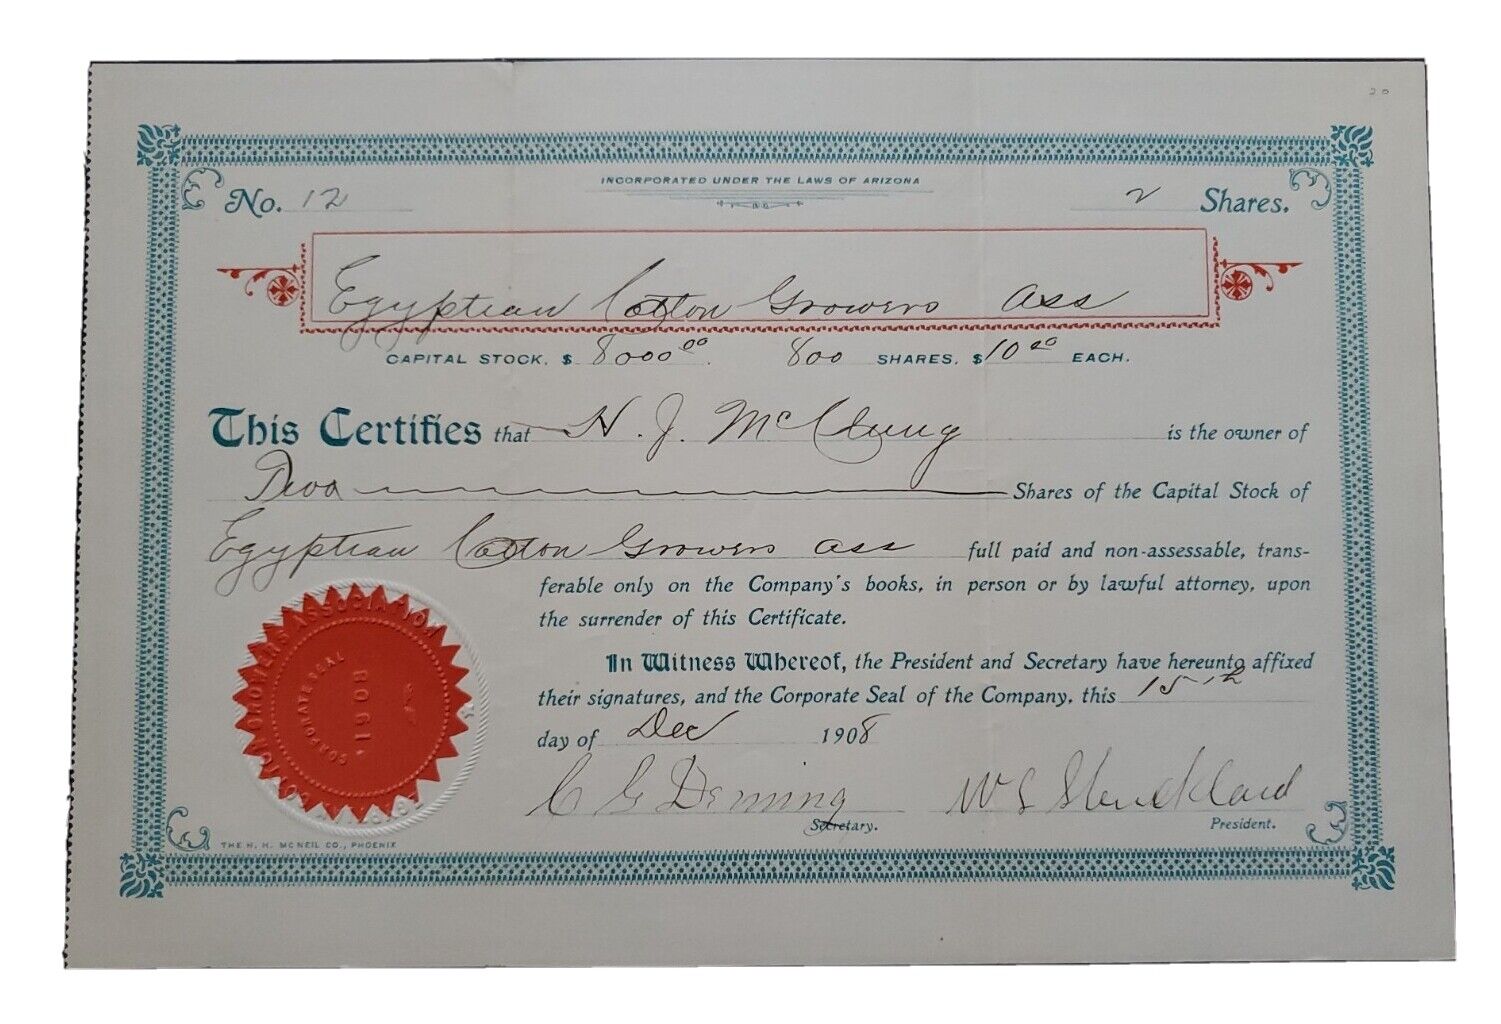 1908 Egyptian Cotton Stock Certificate #12 Issued To H.j. Mccluing